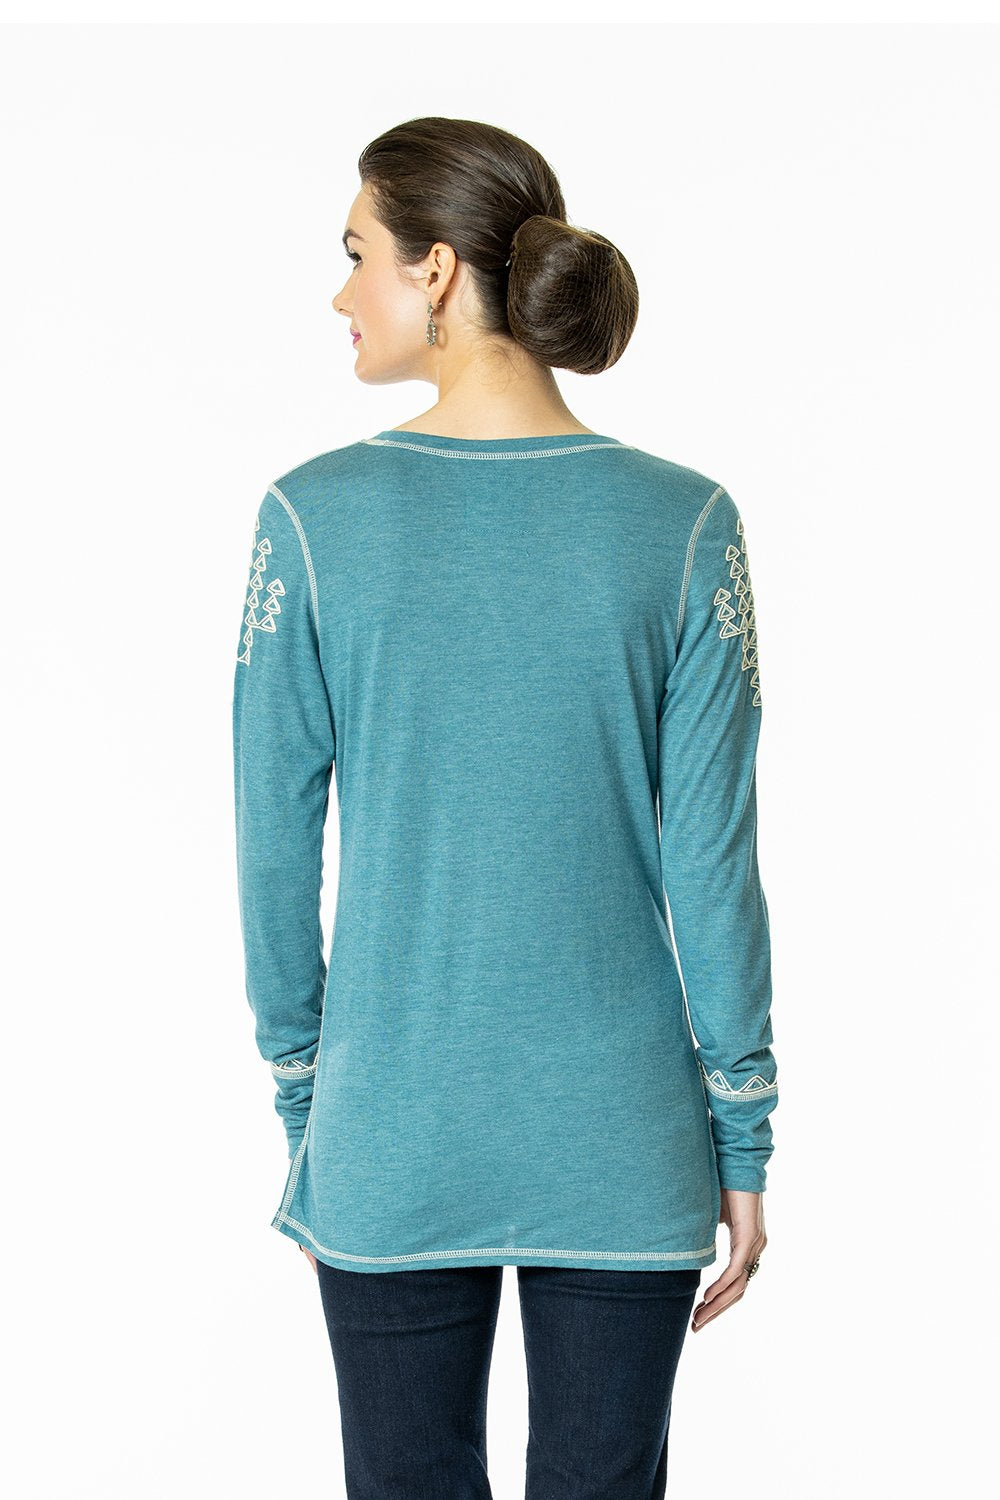 DDR Rocky Ridge Long Sleeve Embrodiered Tee in Taos Turquoise 6Whiskey six whisky T3374